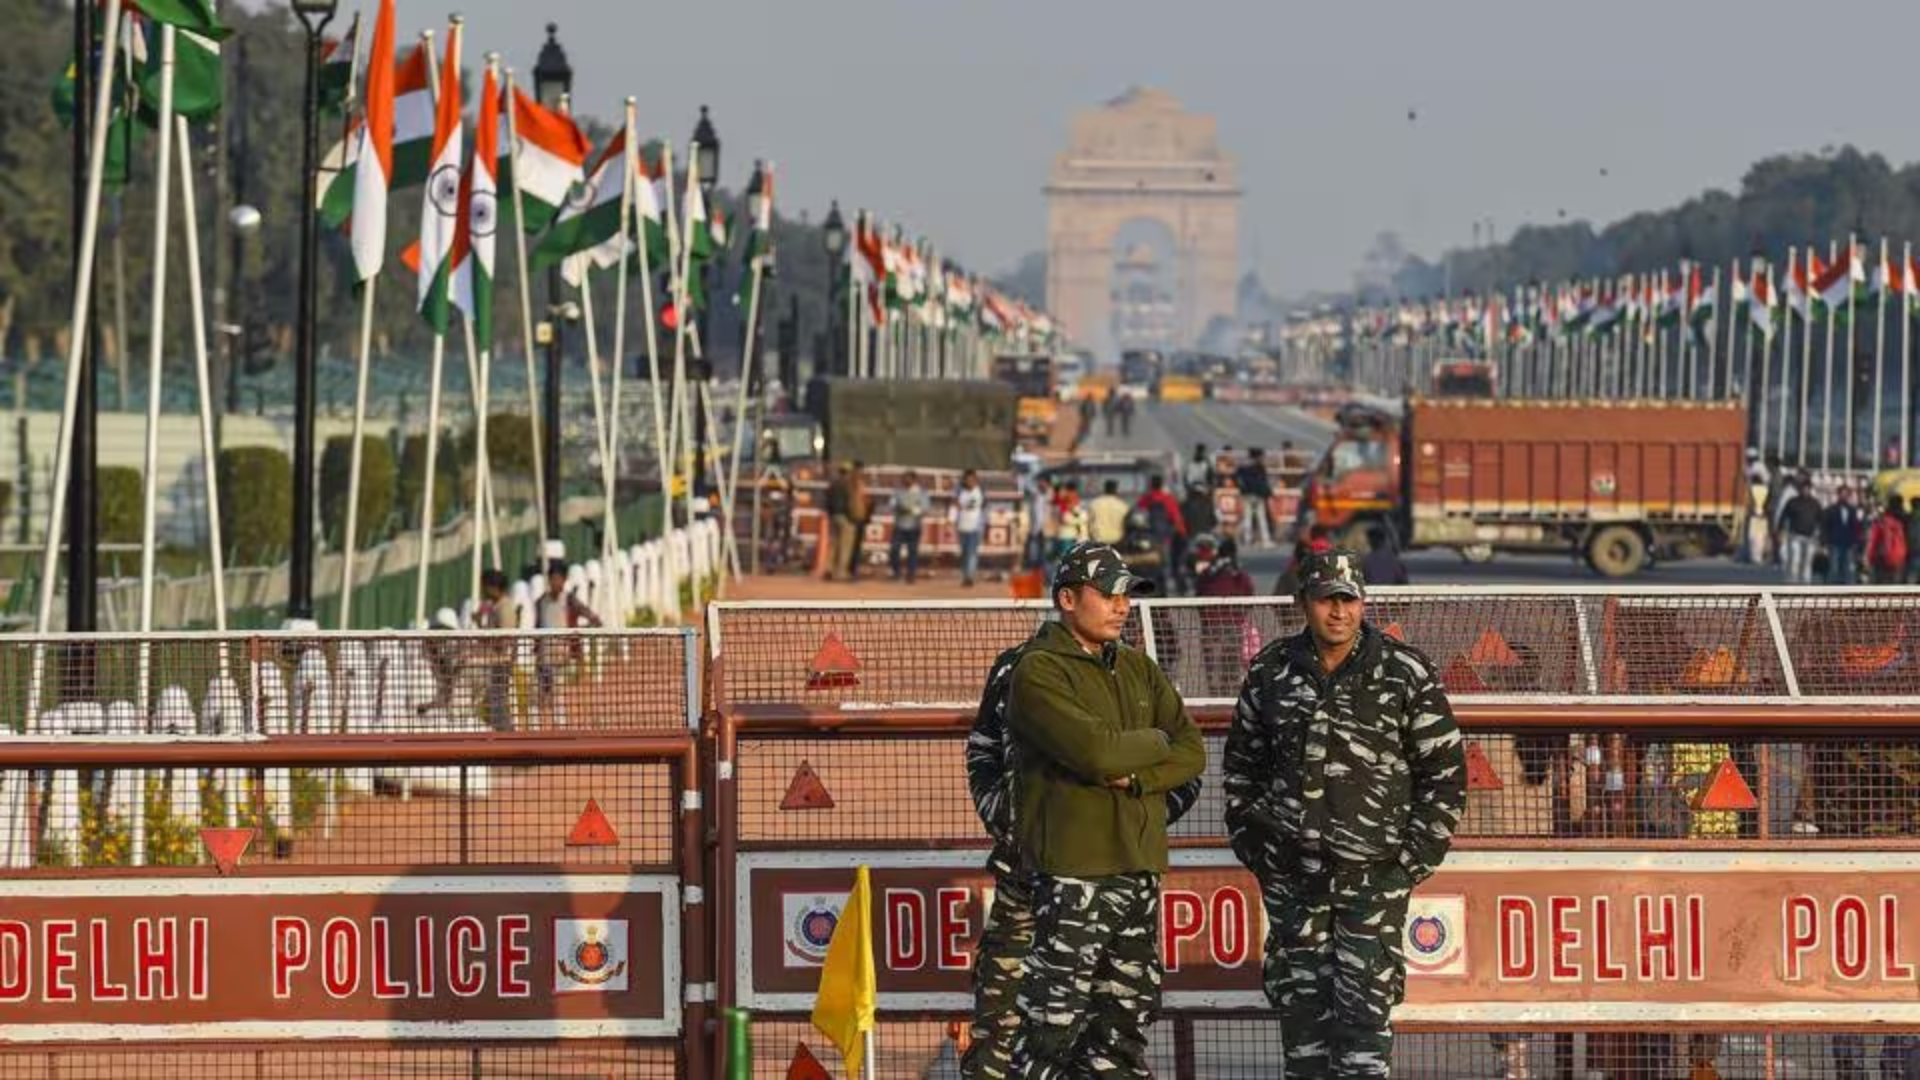 Delhi Authorities Intensify Security Measures Ahead of Republic Day Celebrations